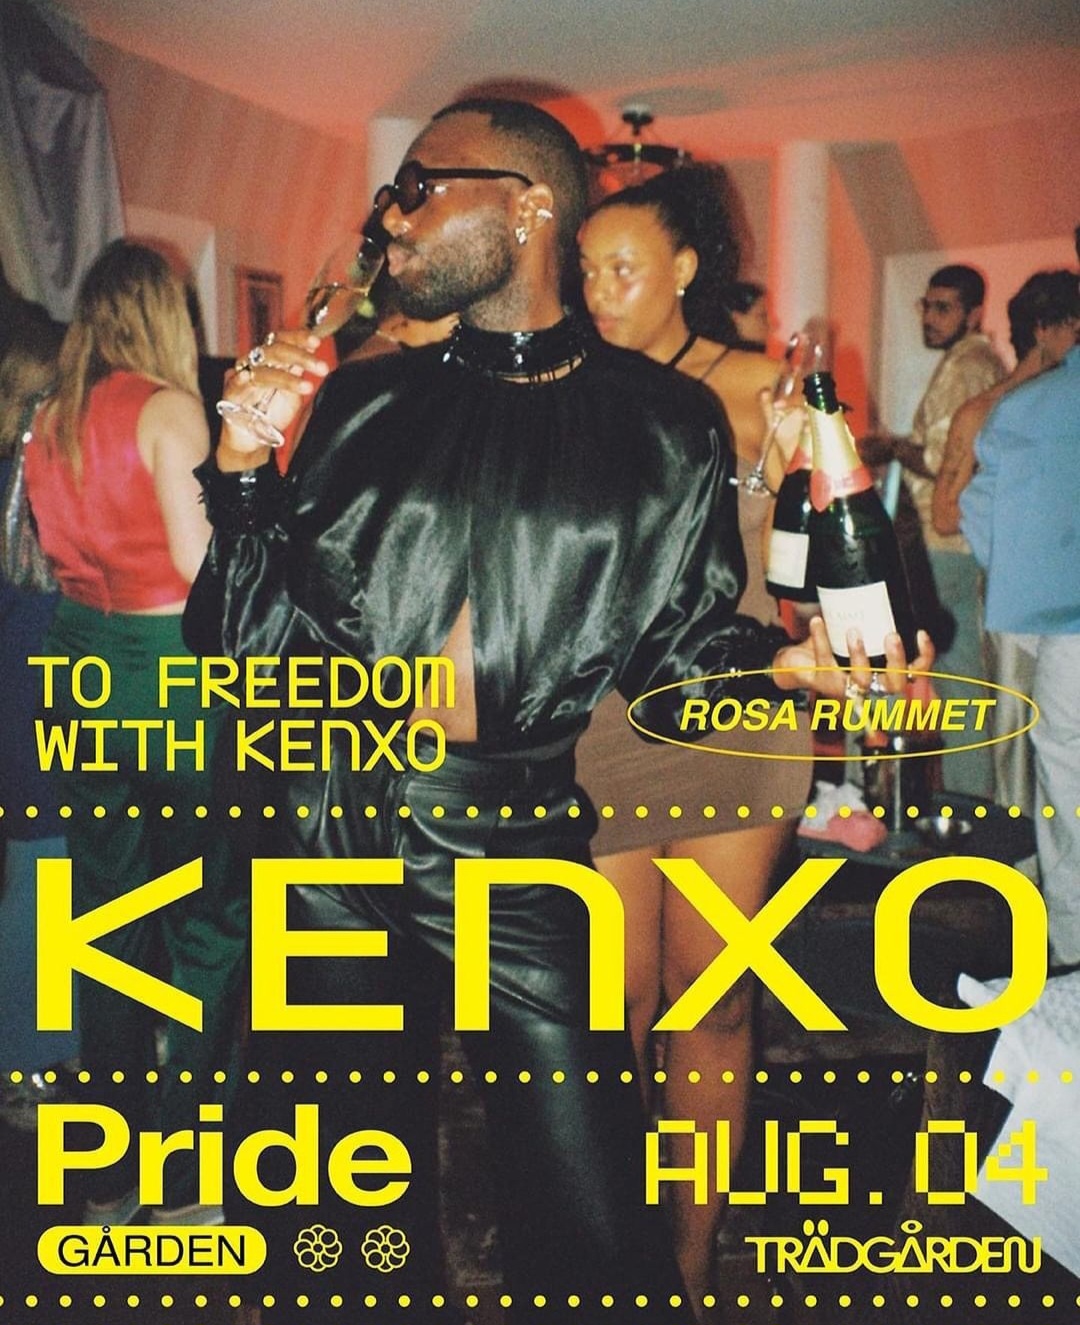 KLUBB! The freedom with Kenzo (STOCKHOLM)